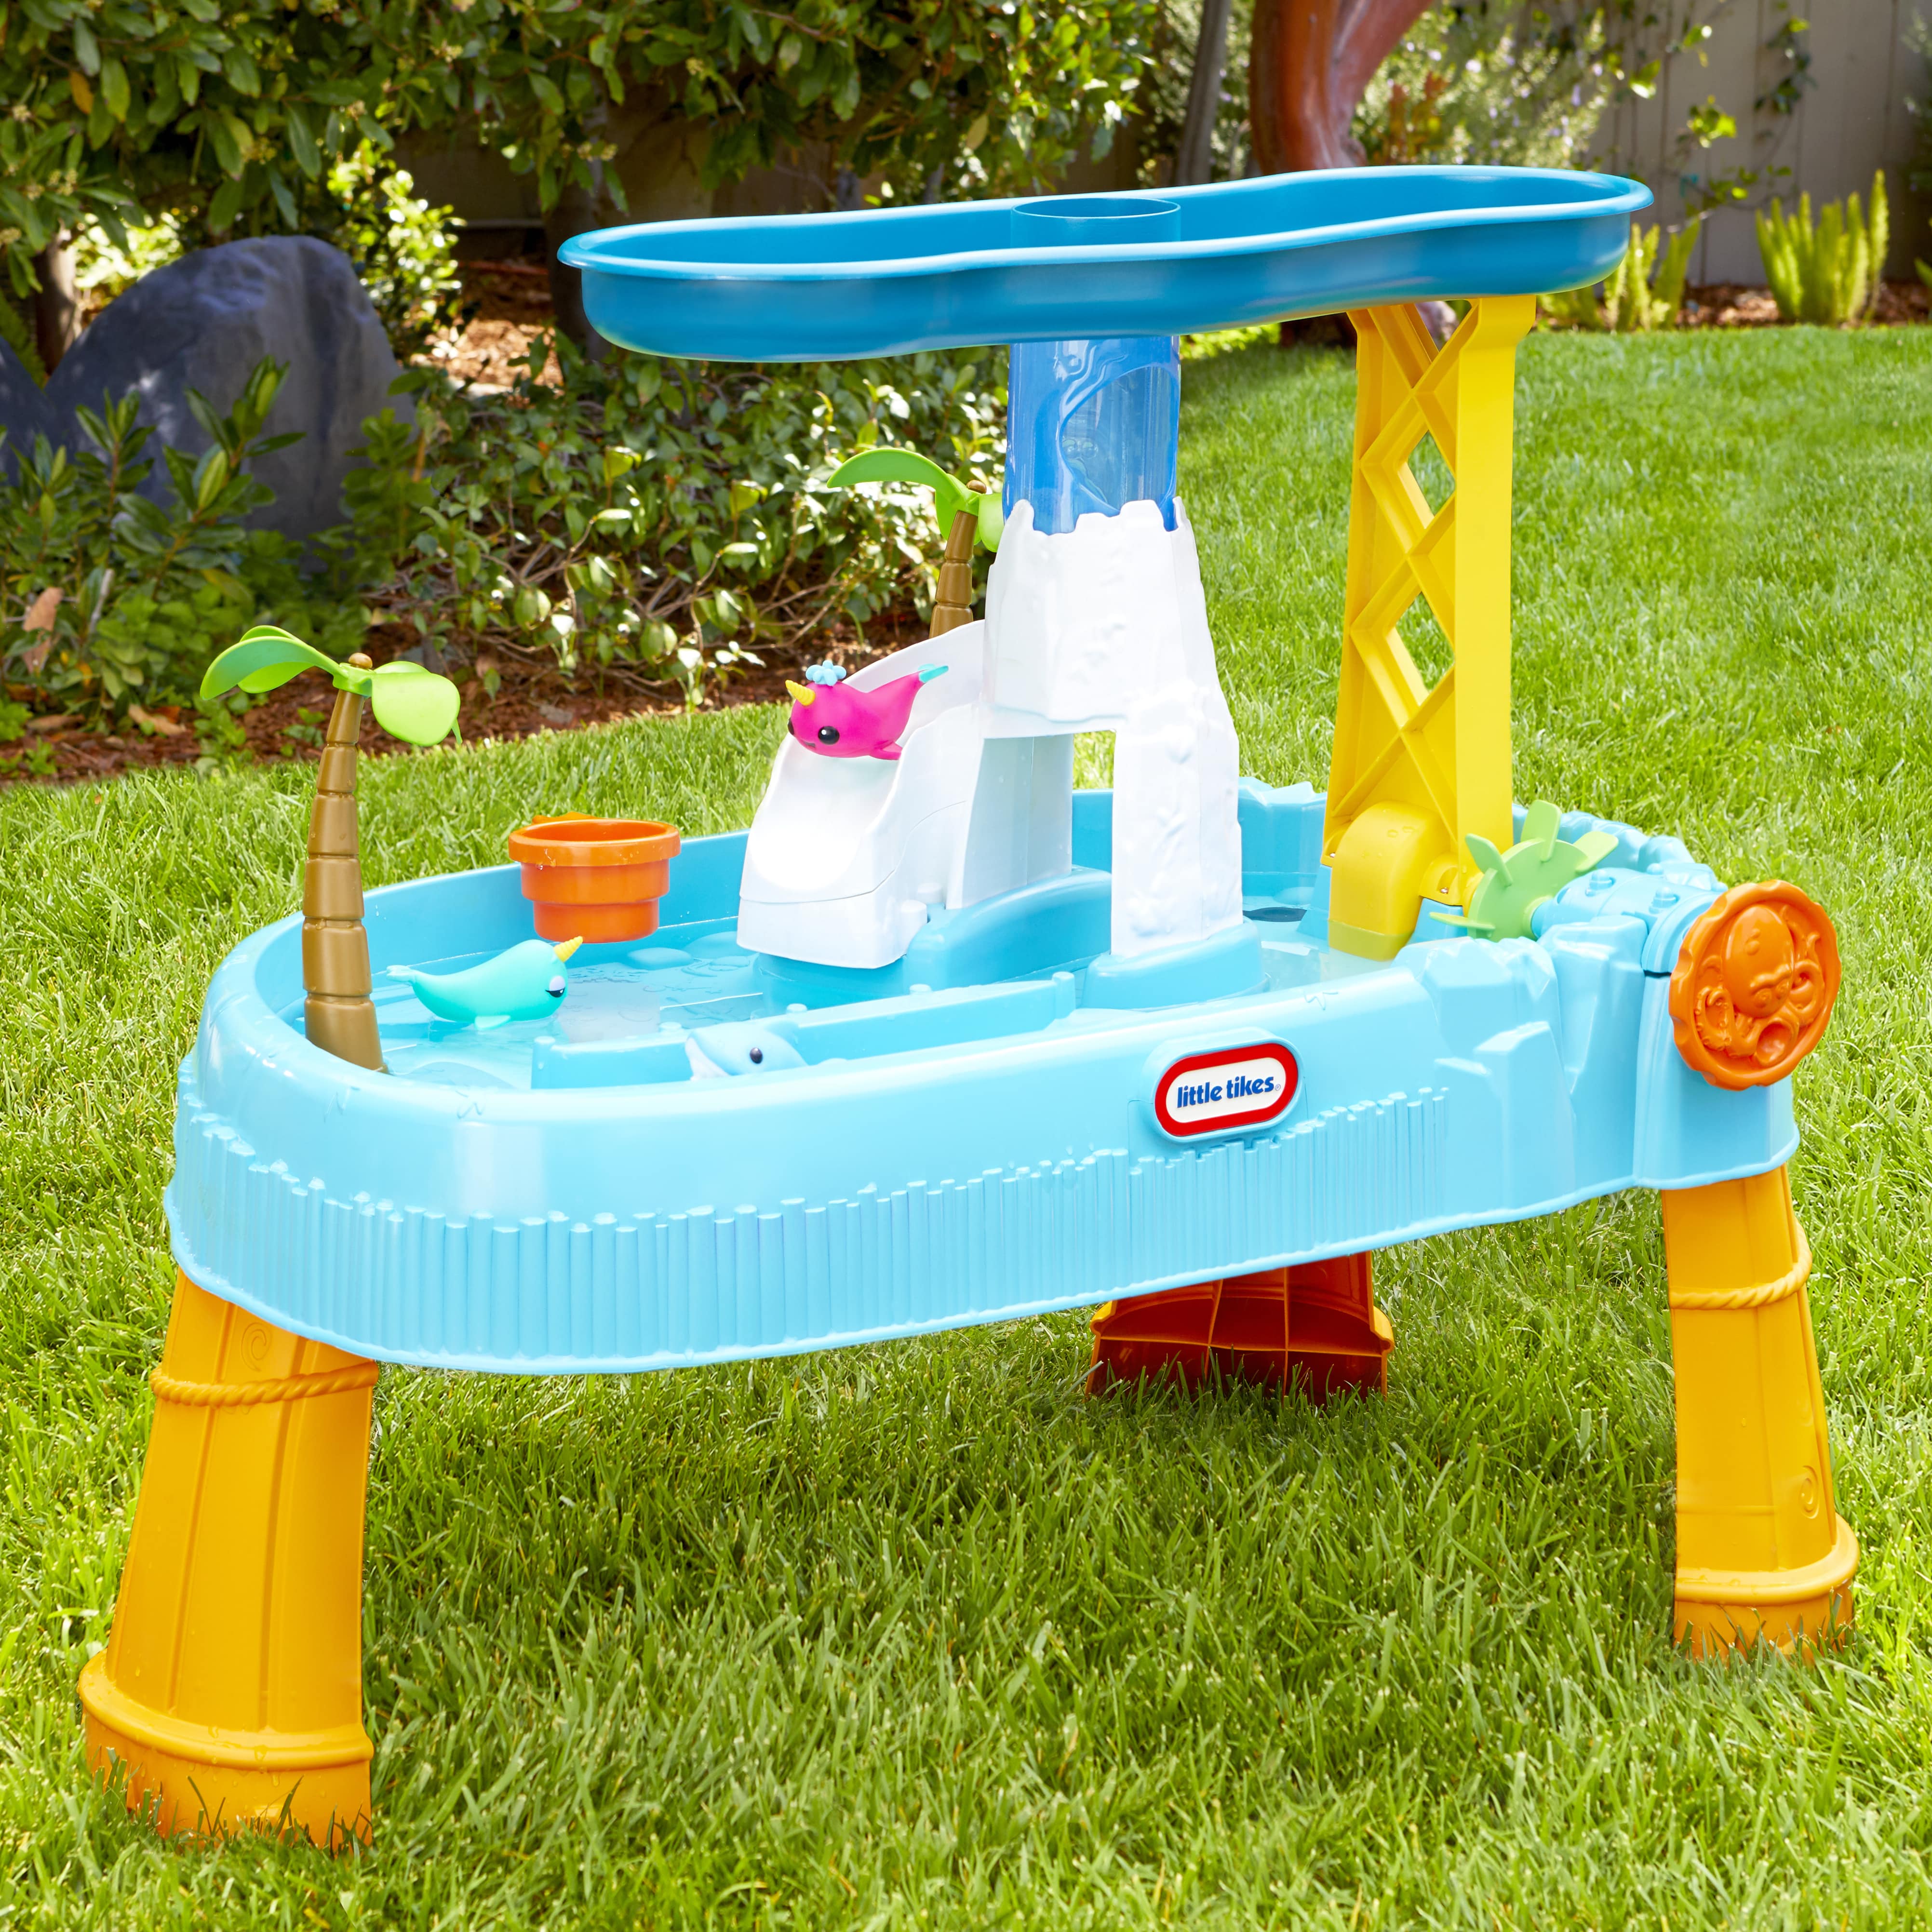 Little Tikes® Waterfall Island™ Water Activity Table with Accessories, for Kids ages 2-5 years - image 3 of 8